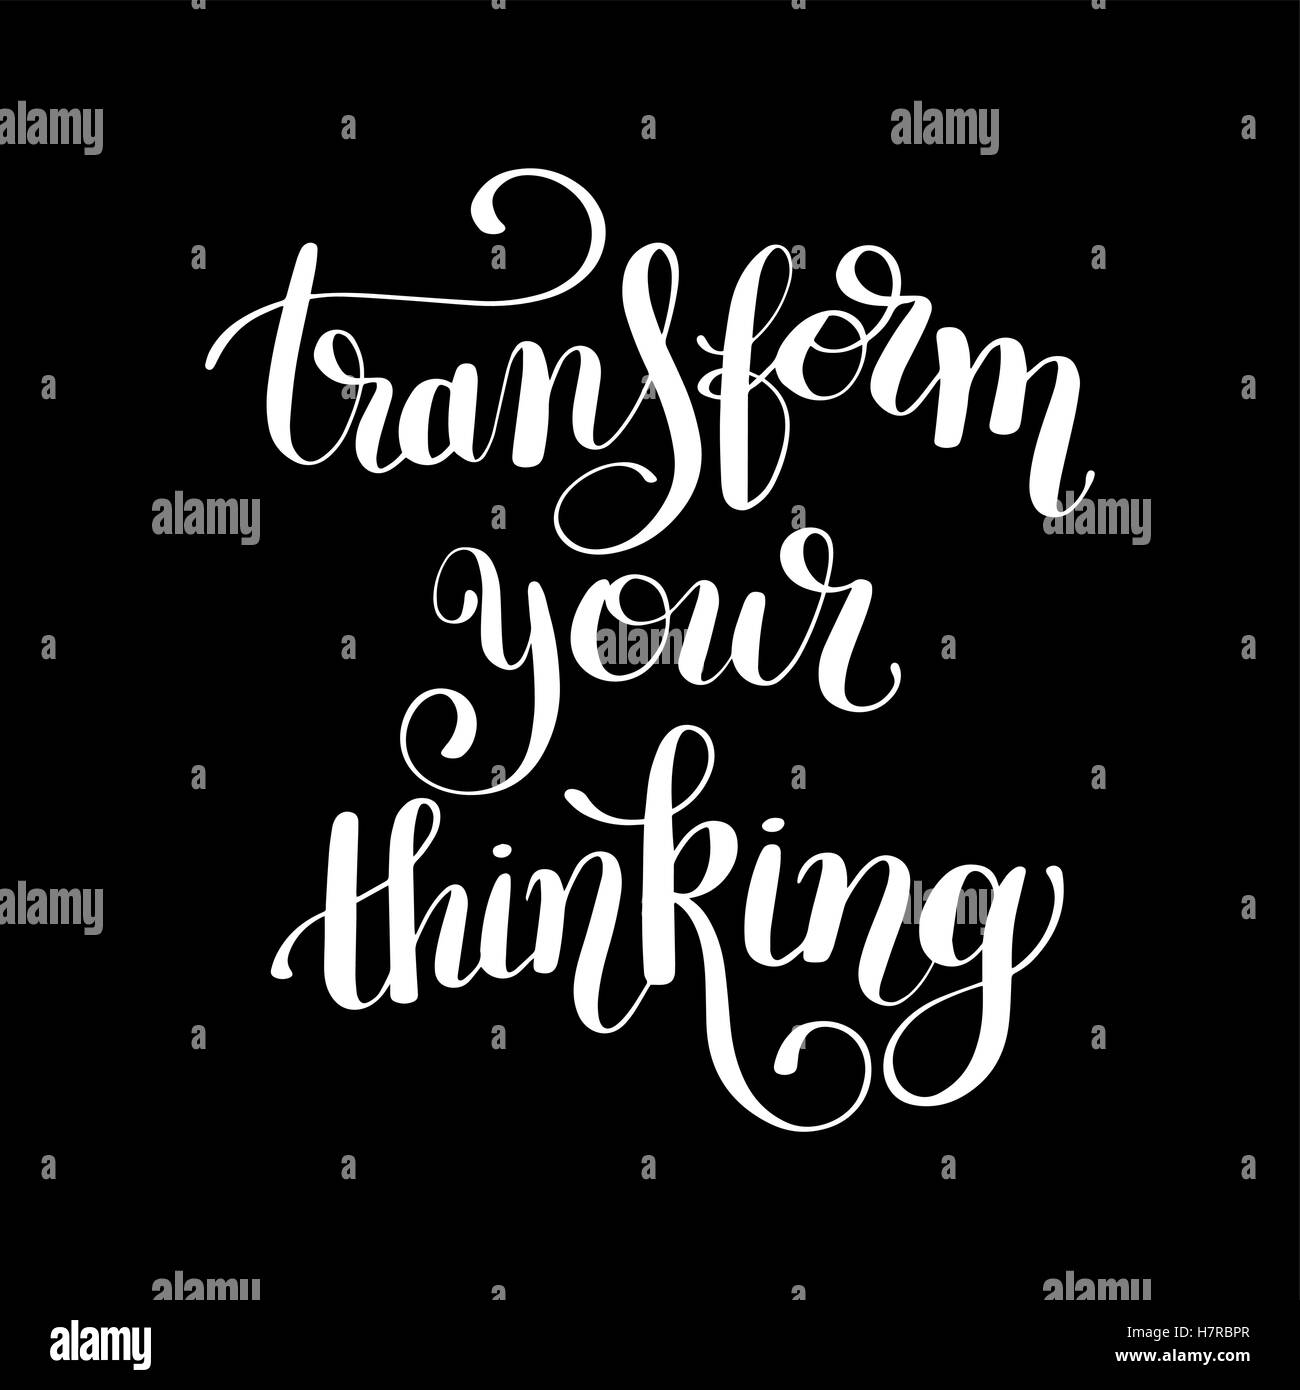 transform your thinking black ink hand lettering positive concep Stock Vector